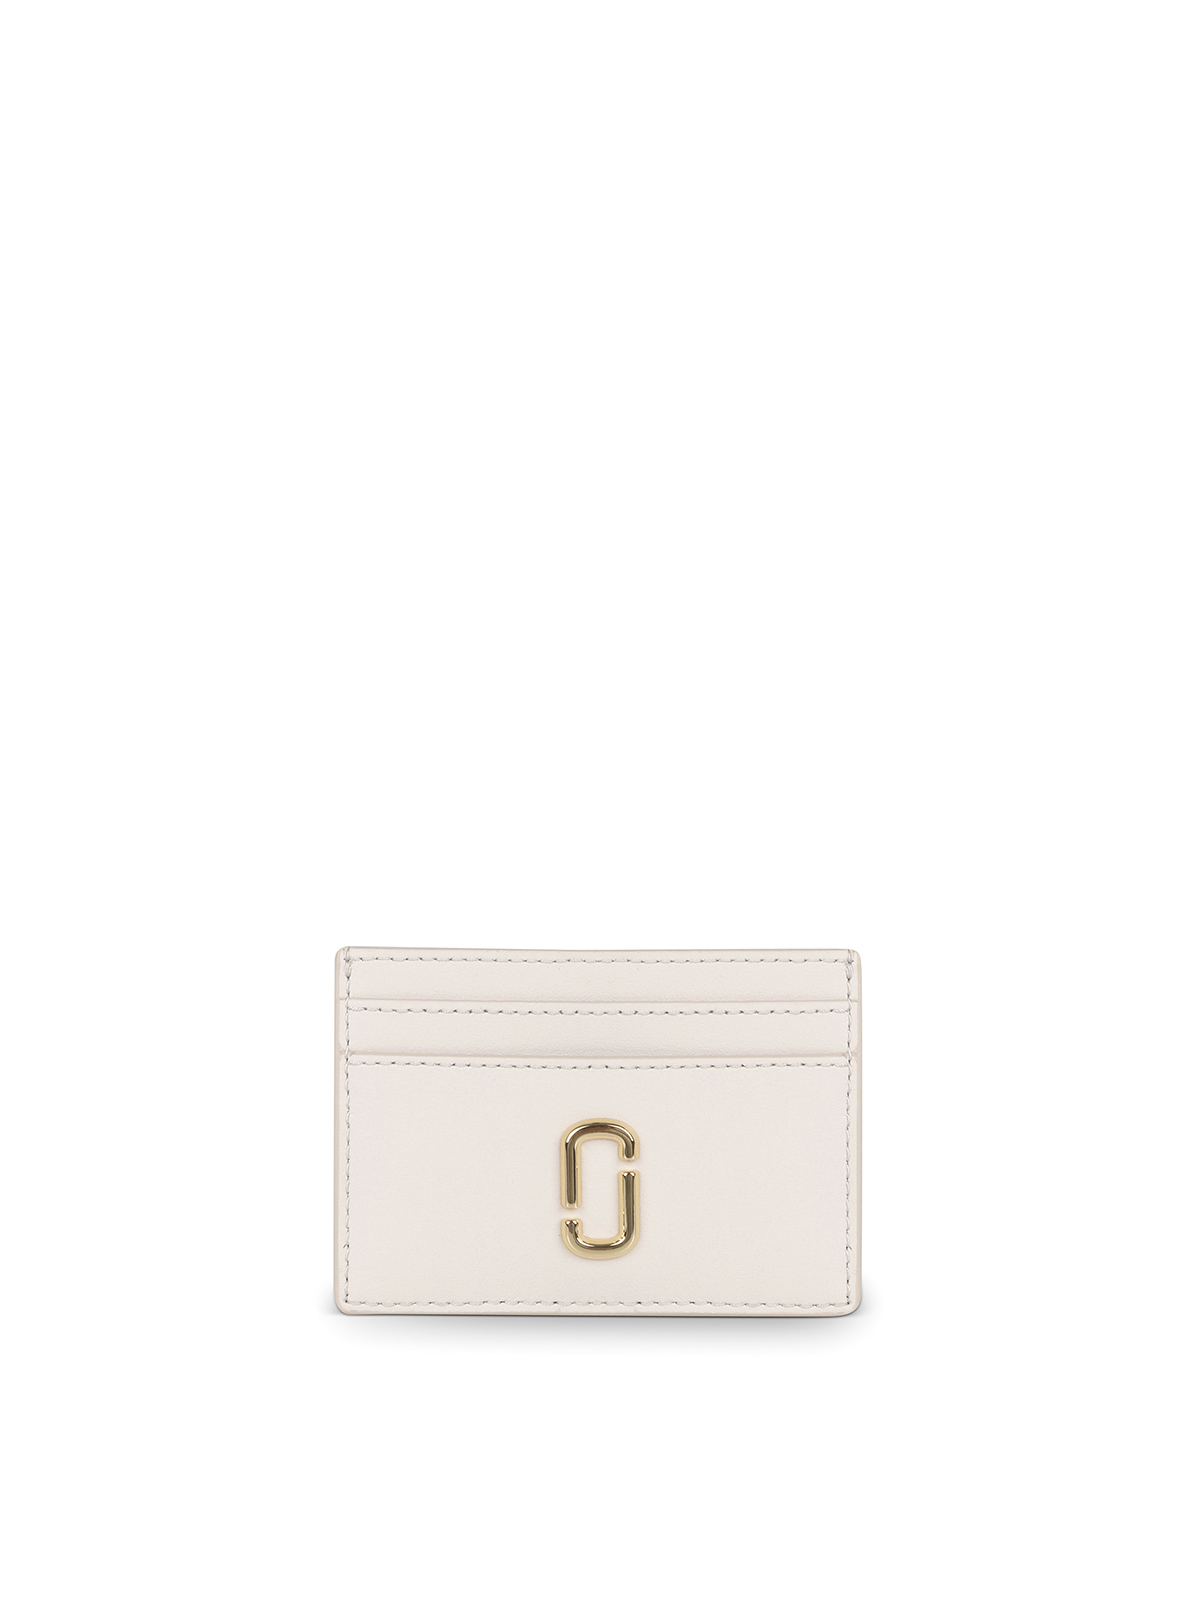 Marc Jacobs Card Holder The Card Holder In White